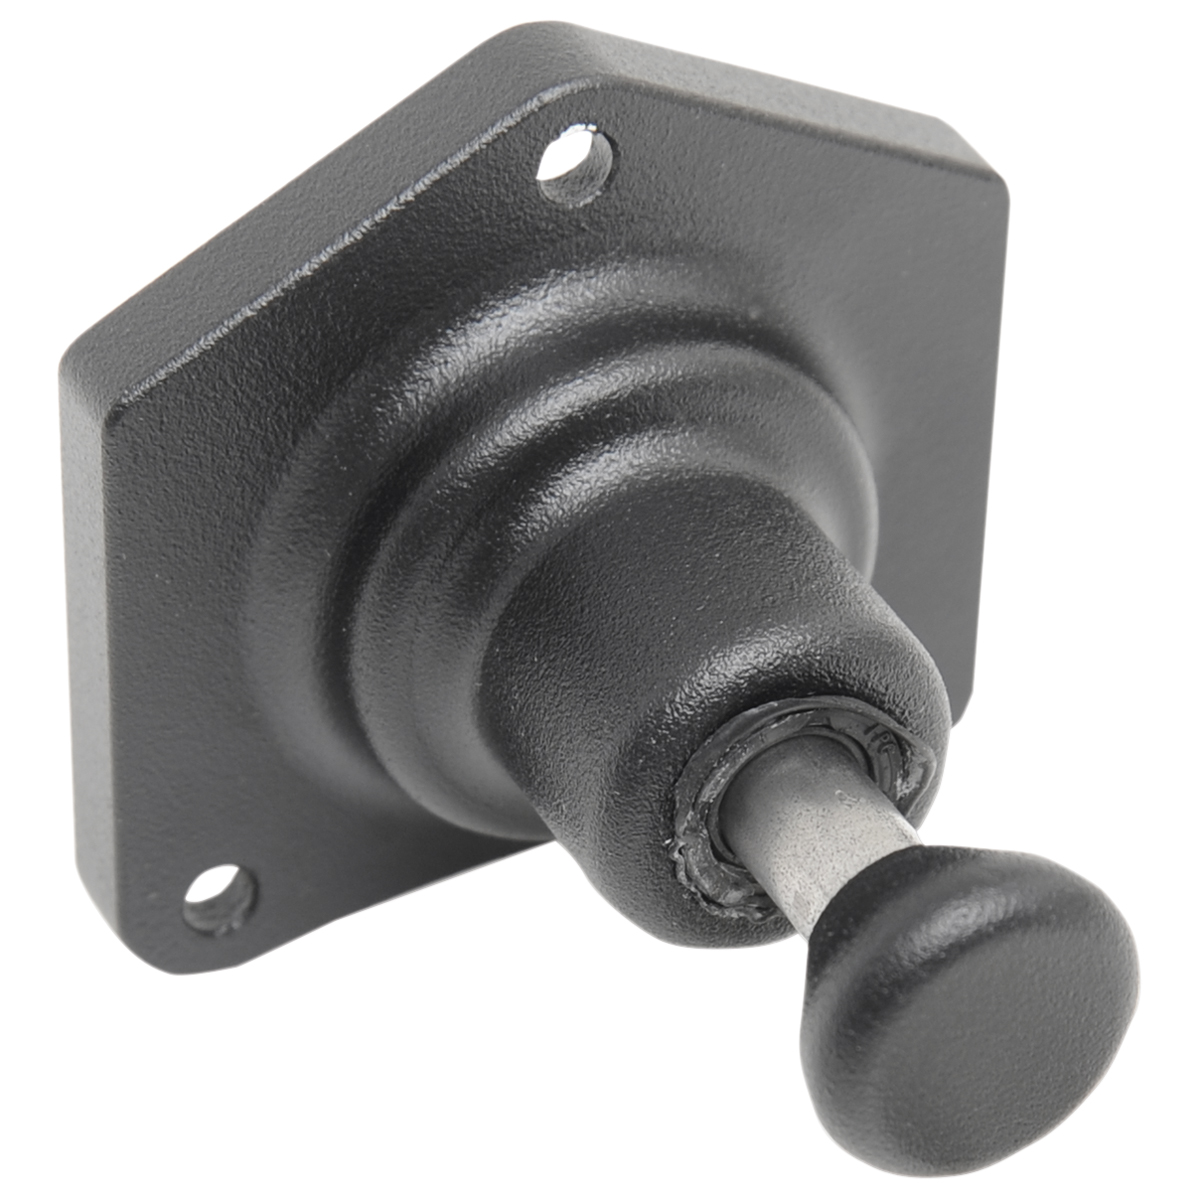 Terry Components Wrinkle Black Fail-Safe Push Button Starter Solenoid